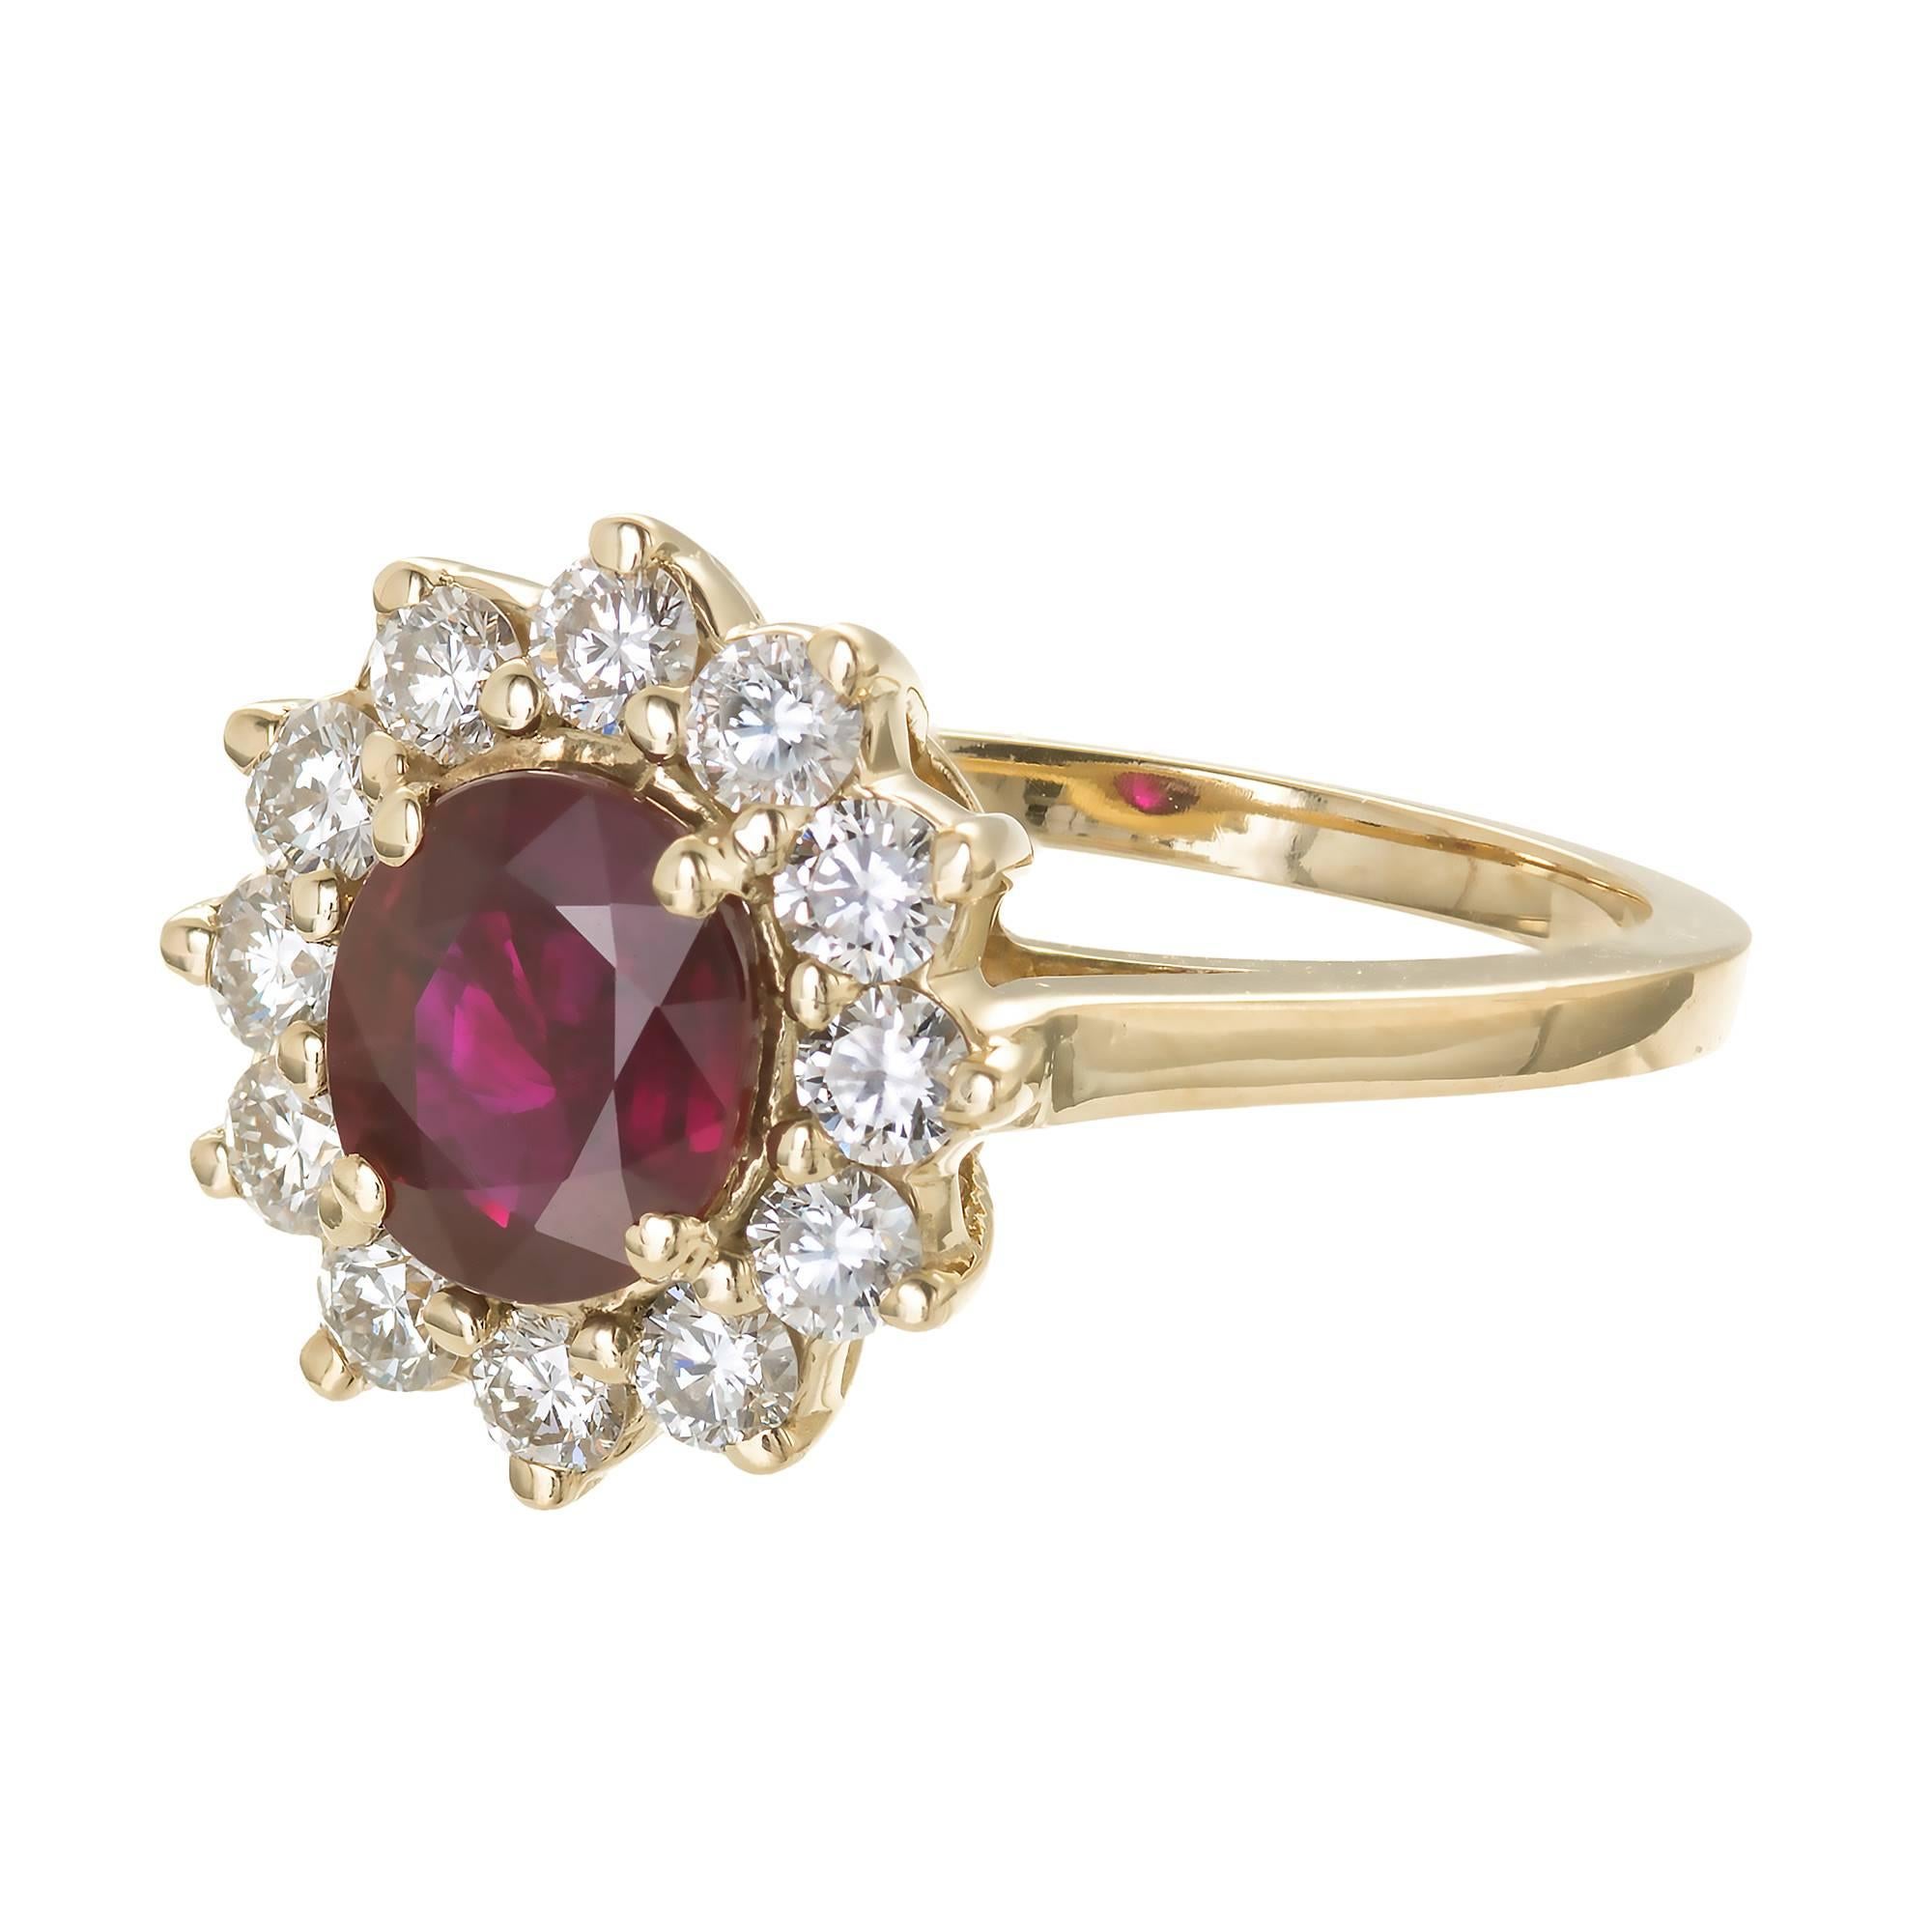 Oval Cut 1.51 Carat Red Ruby Diamond Halo Yellow Gold Engagement Ring